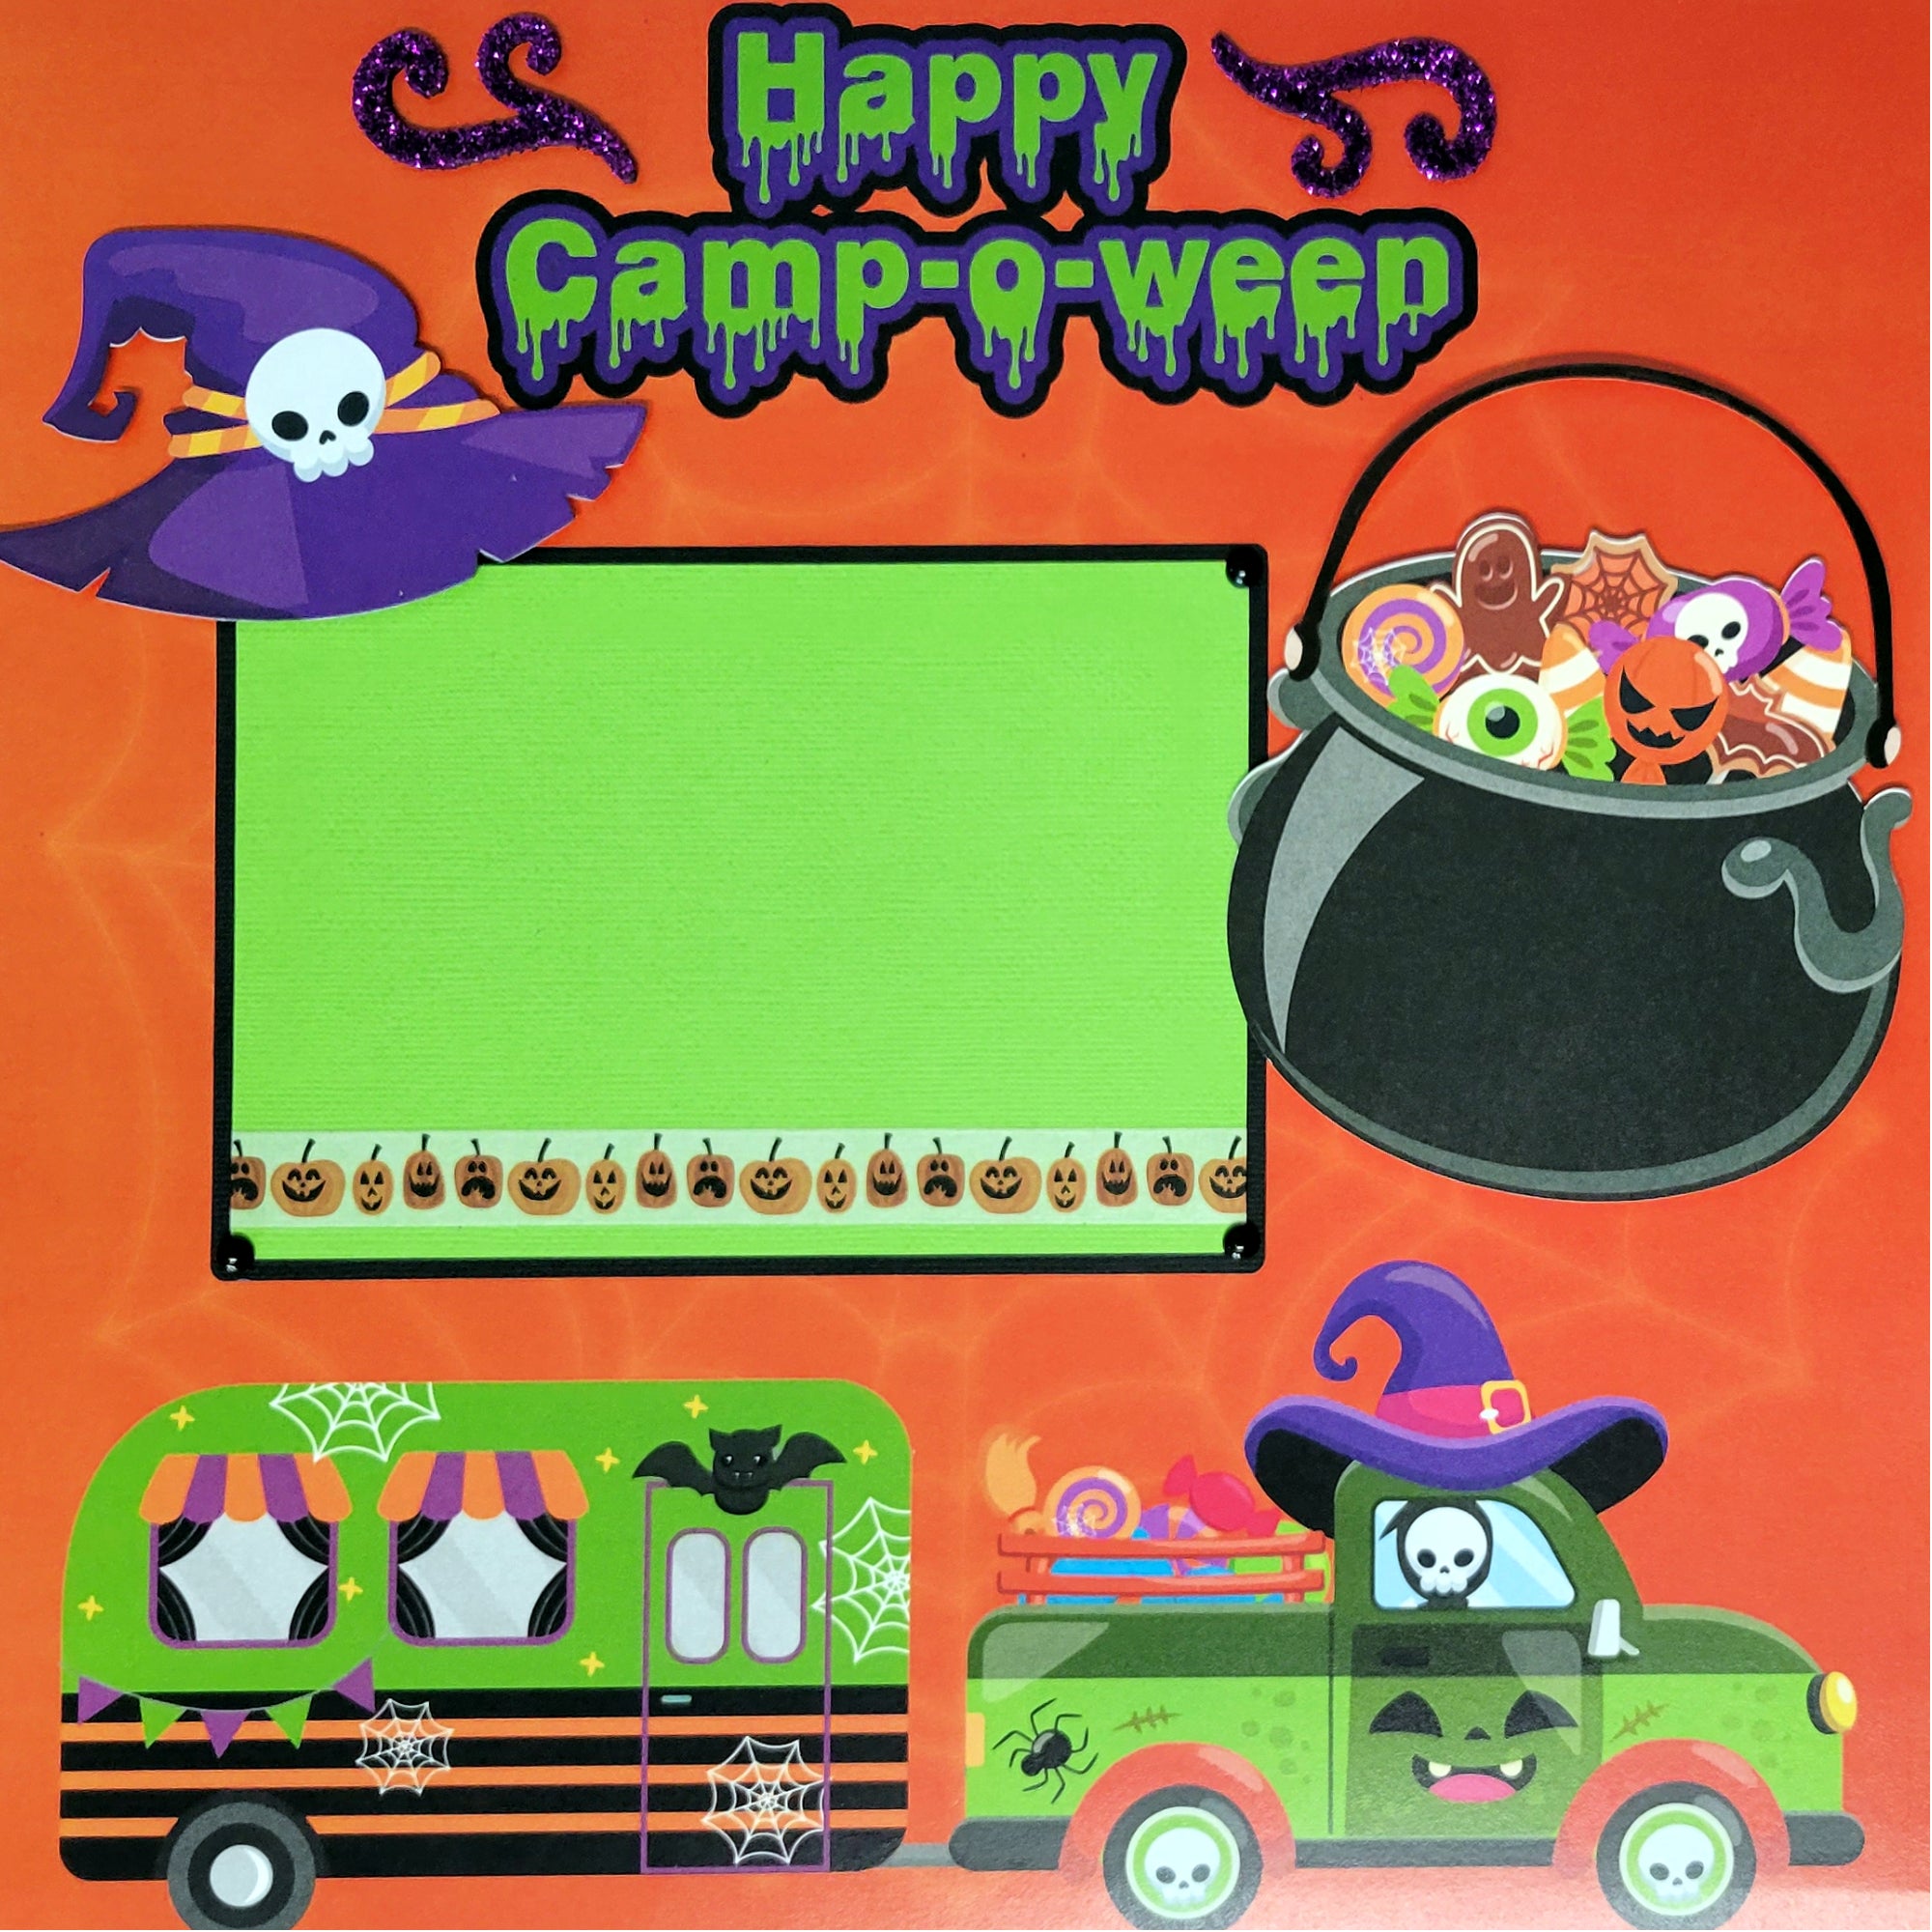 Happy Camp-o-ween (2) - 12 x 12 Premade, Hand-Embellished Scrapbook Pages by SSC Designs